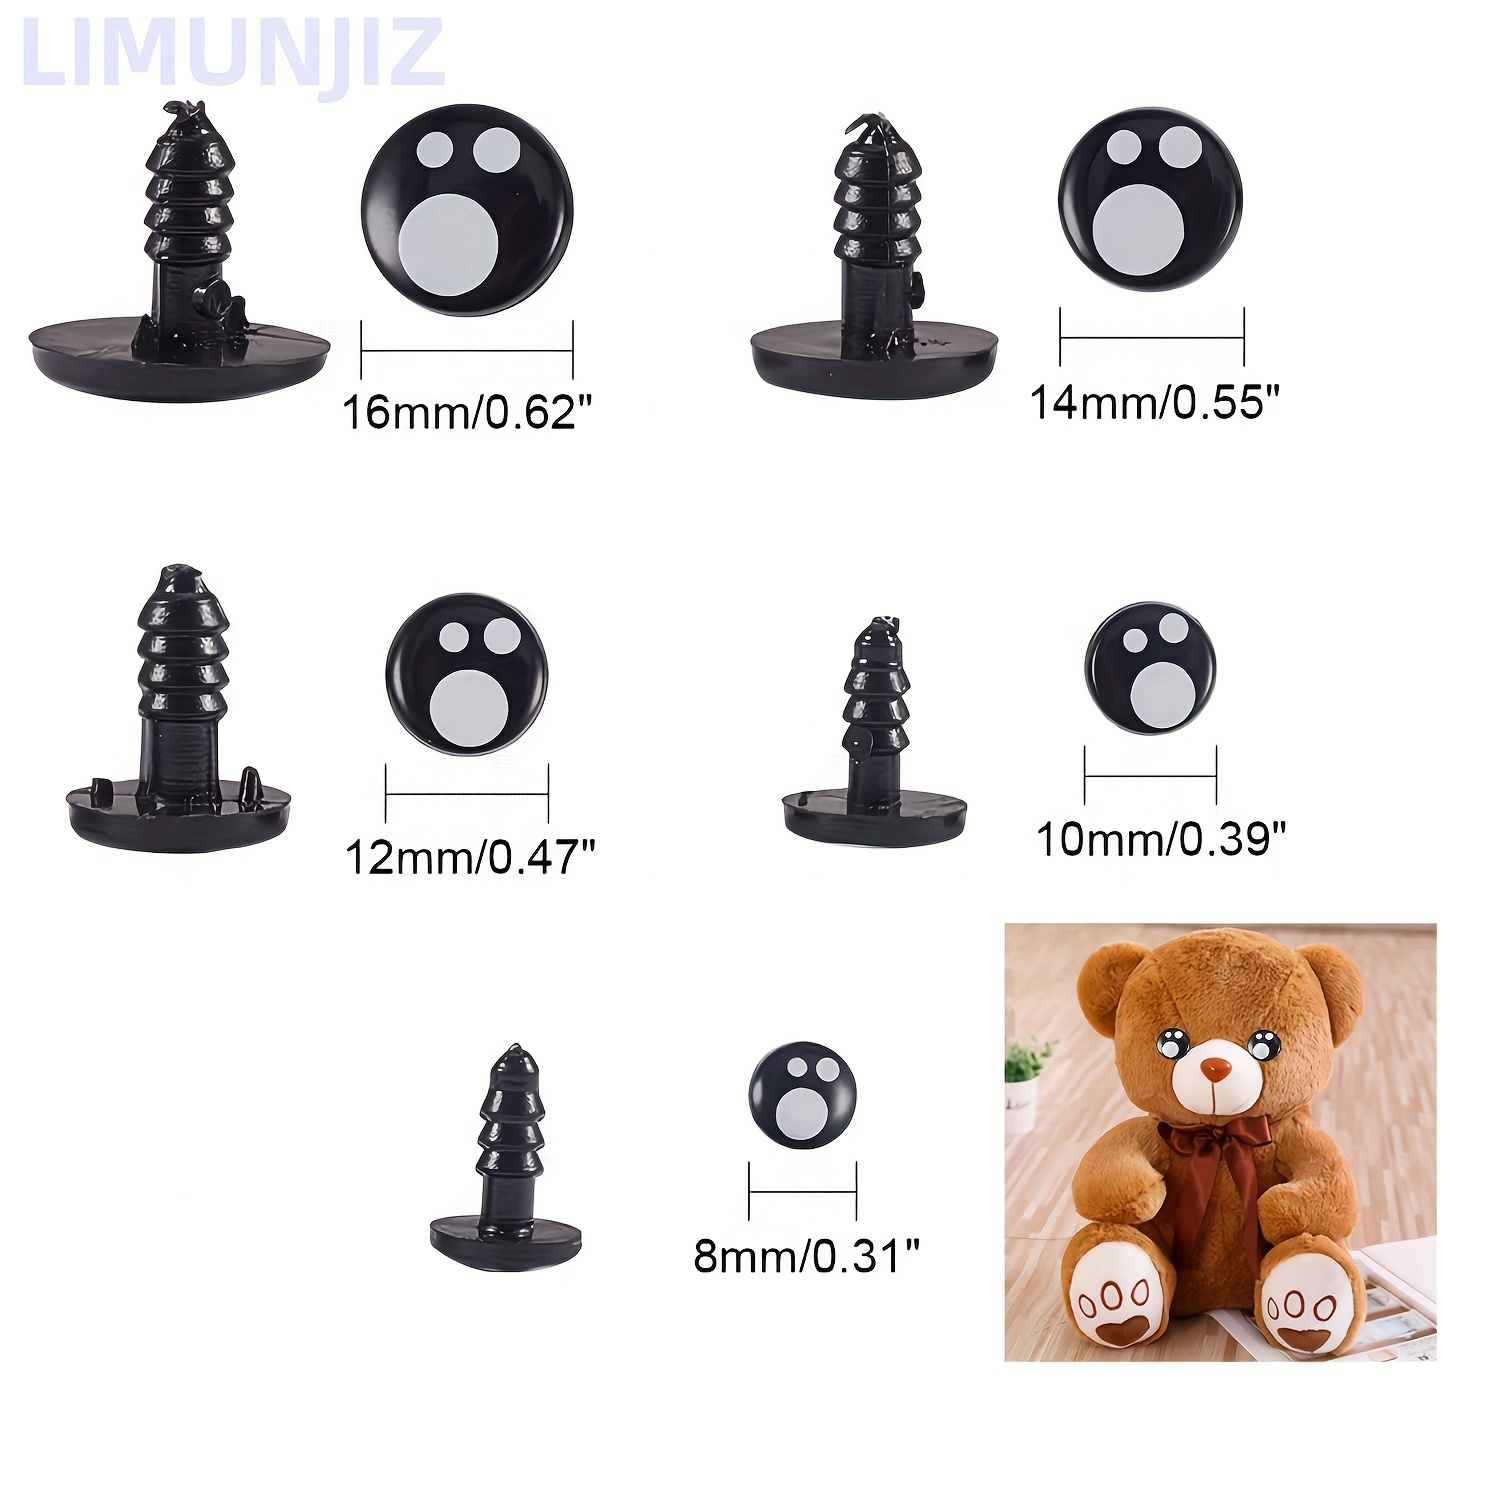 100pcs 6-12mm Black Plastic Safety Eyes for Bear, Doll, Puppet, Plush Animal and Craft One Box, Size: 20